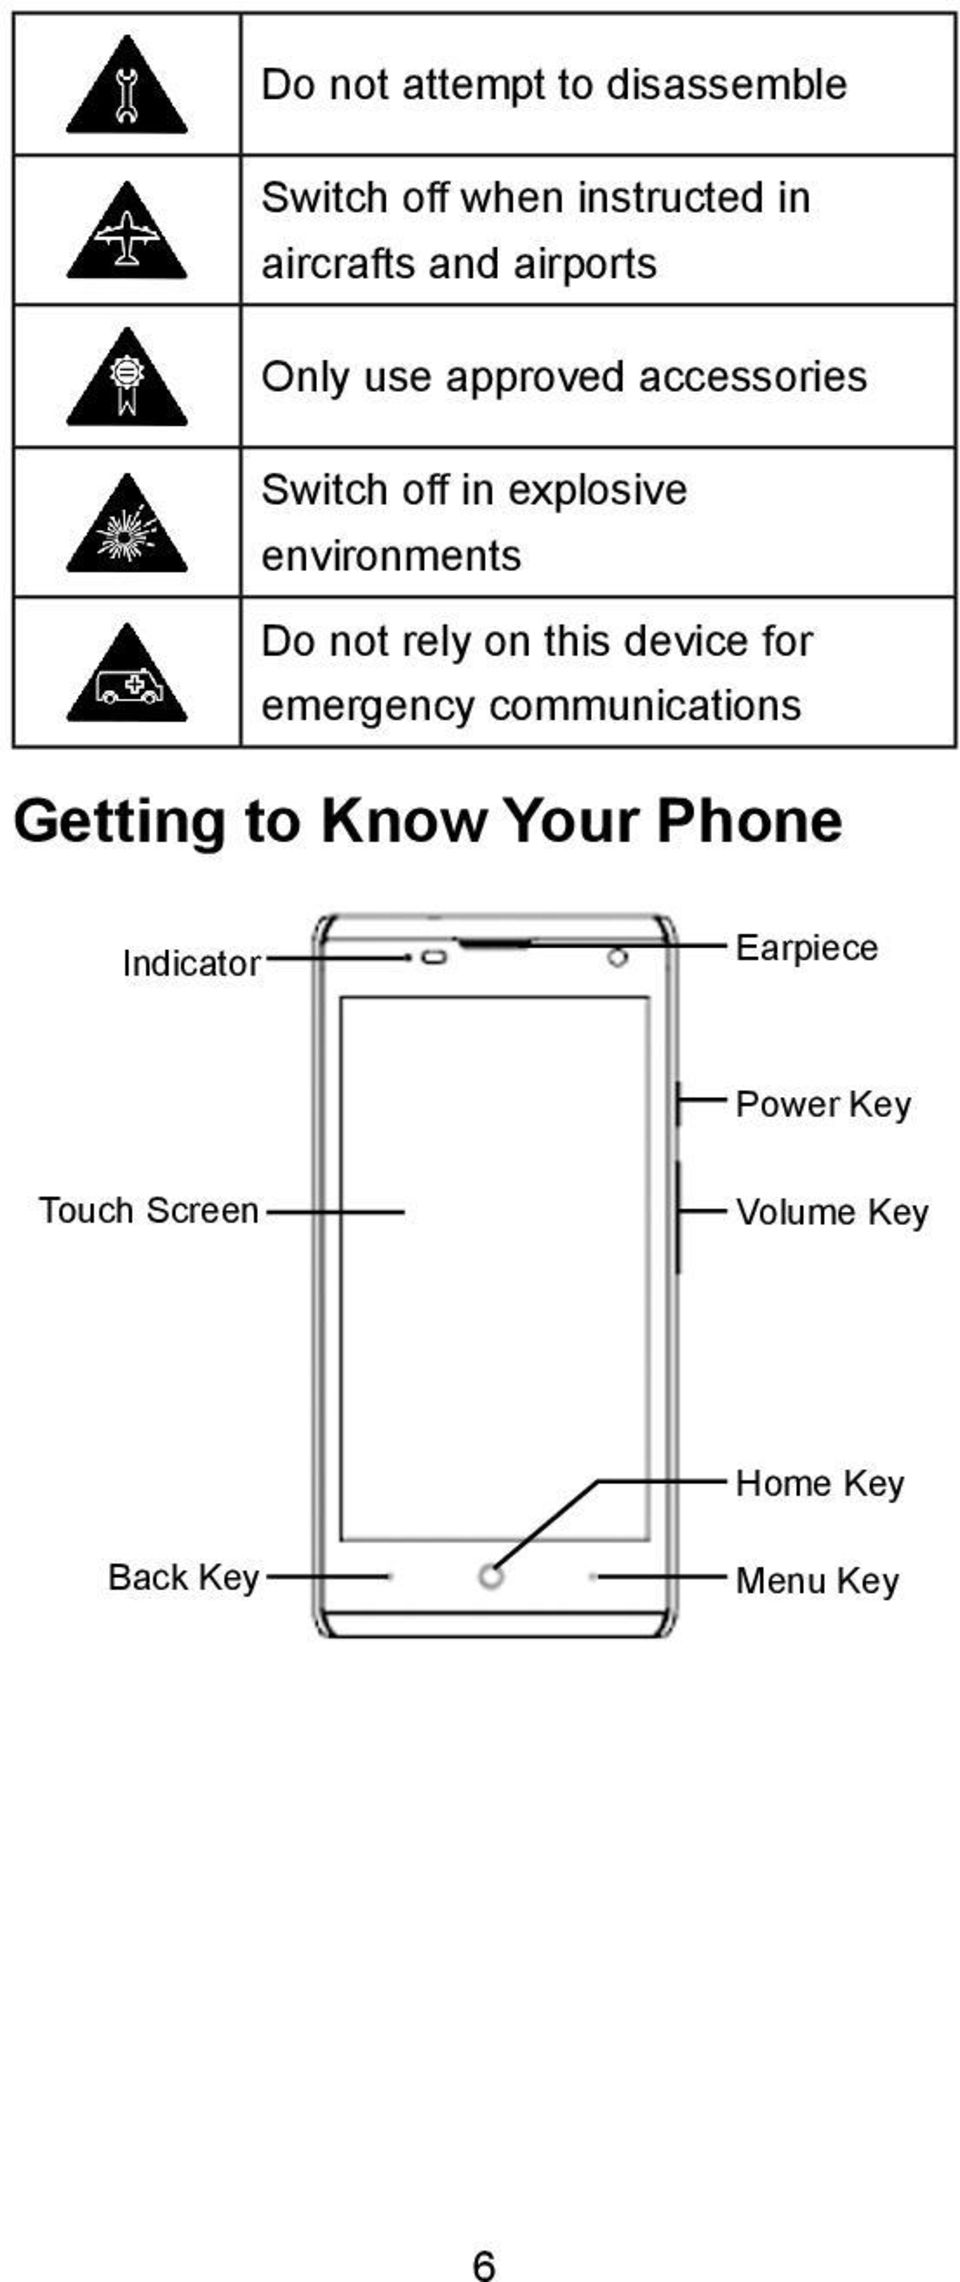 Do not rely on this device for emergency communications Getting to Know Your